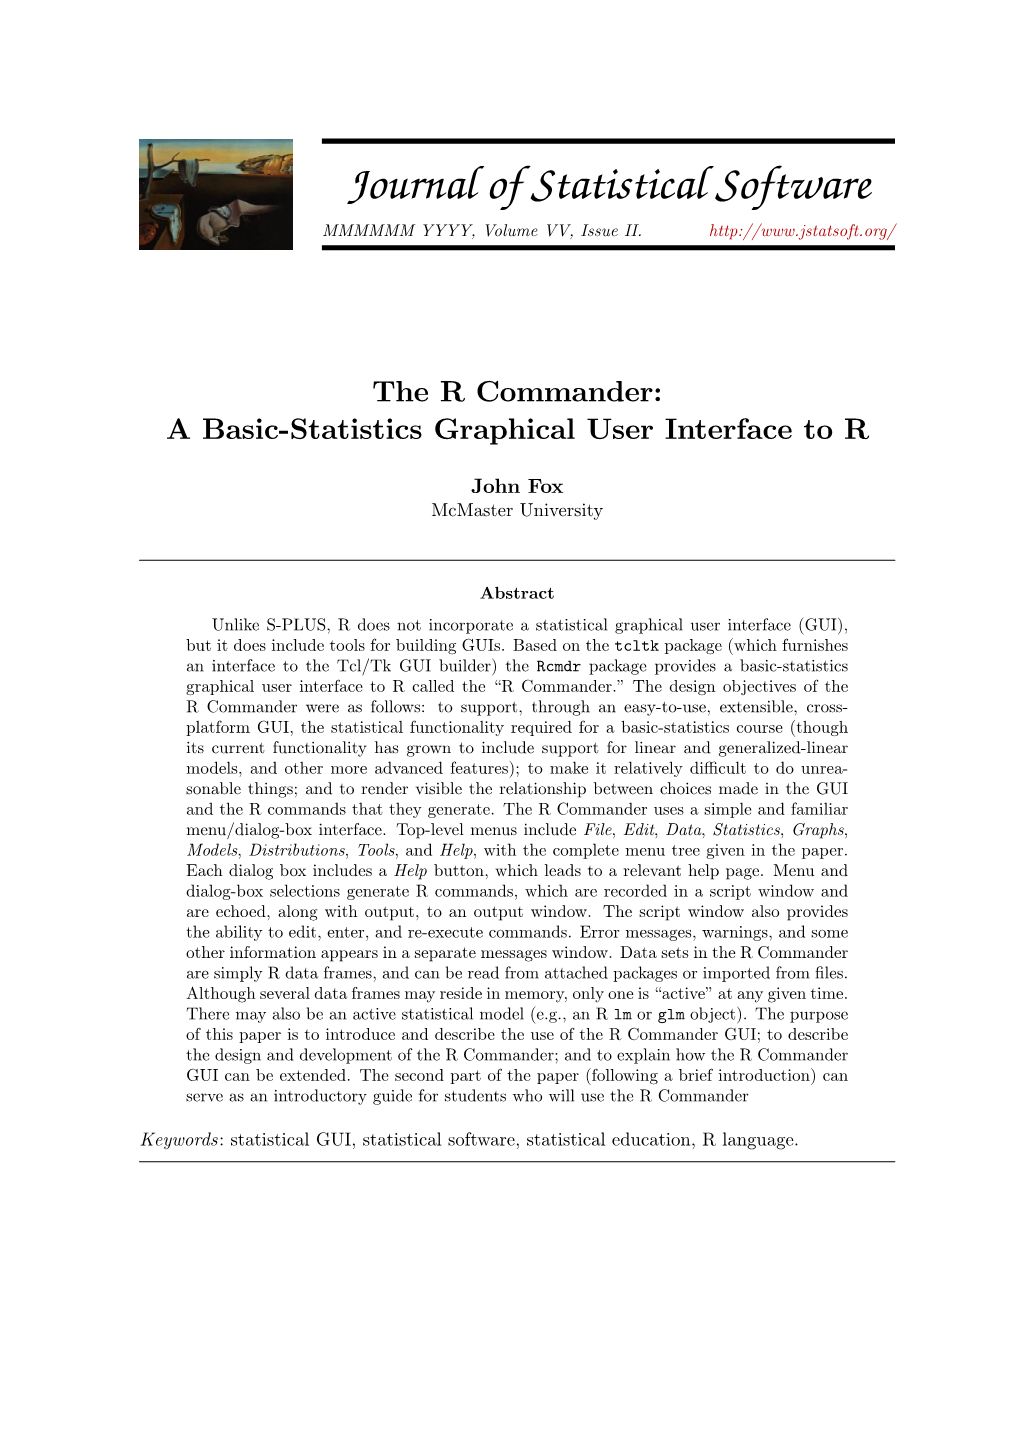 The R Commander: a Basic-Statistics Graphical User Interface to R